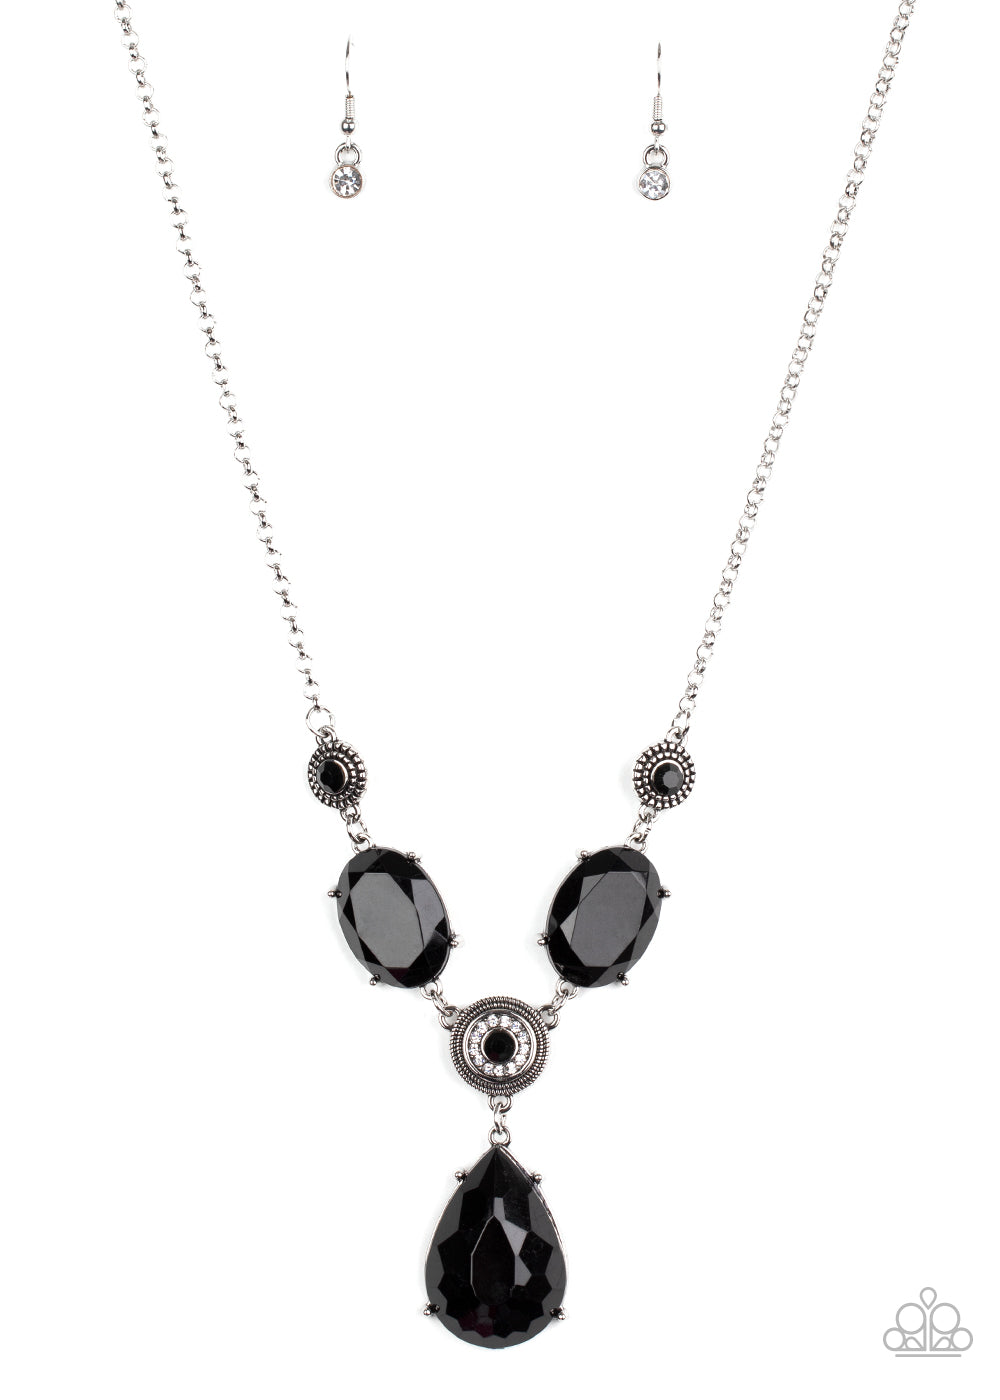 Heirloom Hideaway Black Necklace - Paparazzi Accessories. A collection of black and white rhinestone dotted silver frames link with a pair of black oval gems below the collar. A dramatically oversized black teardrop drips from the center, creating a glamorous pendant. Features an adjustable clasp closure.  All Paparazzi Accessories are lead free and nickel free!   Sold as one individual necklace. Includes one pair of matching earrings.